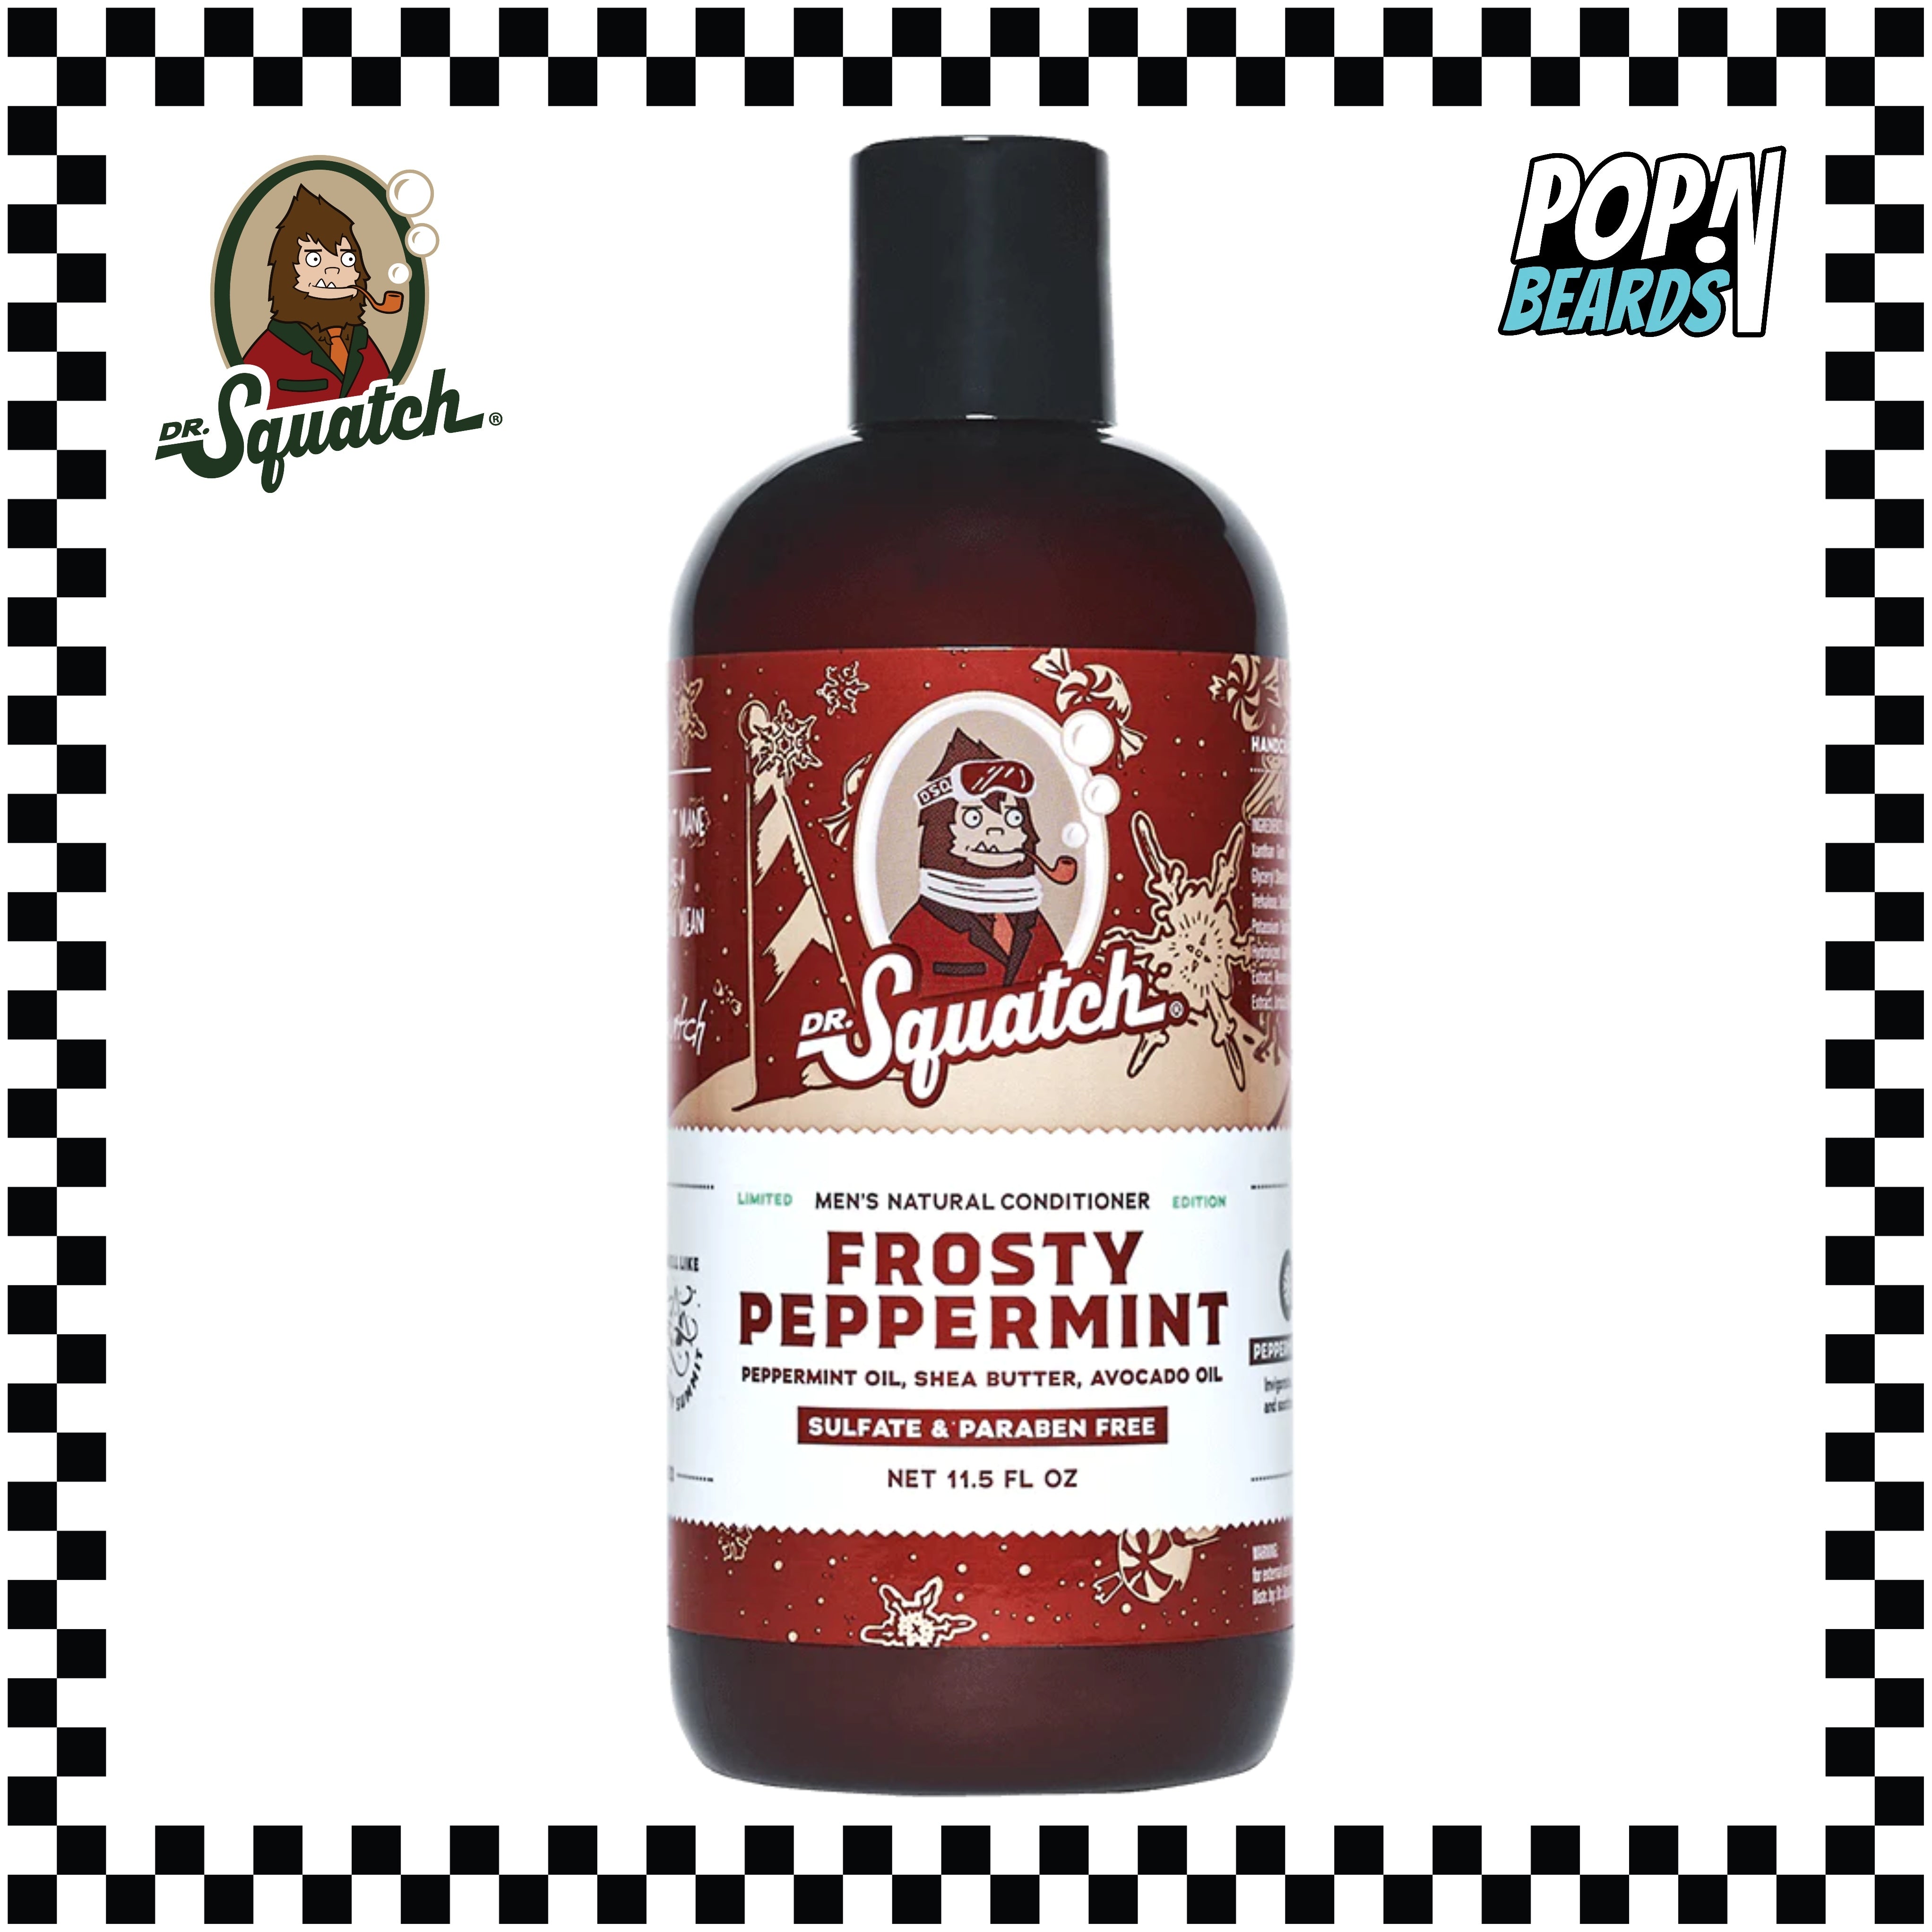 Dr. Squatch Frosty Peppermint Shampoo + Conditioner Limited Edition RARE!!!